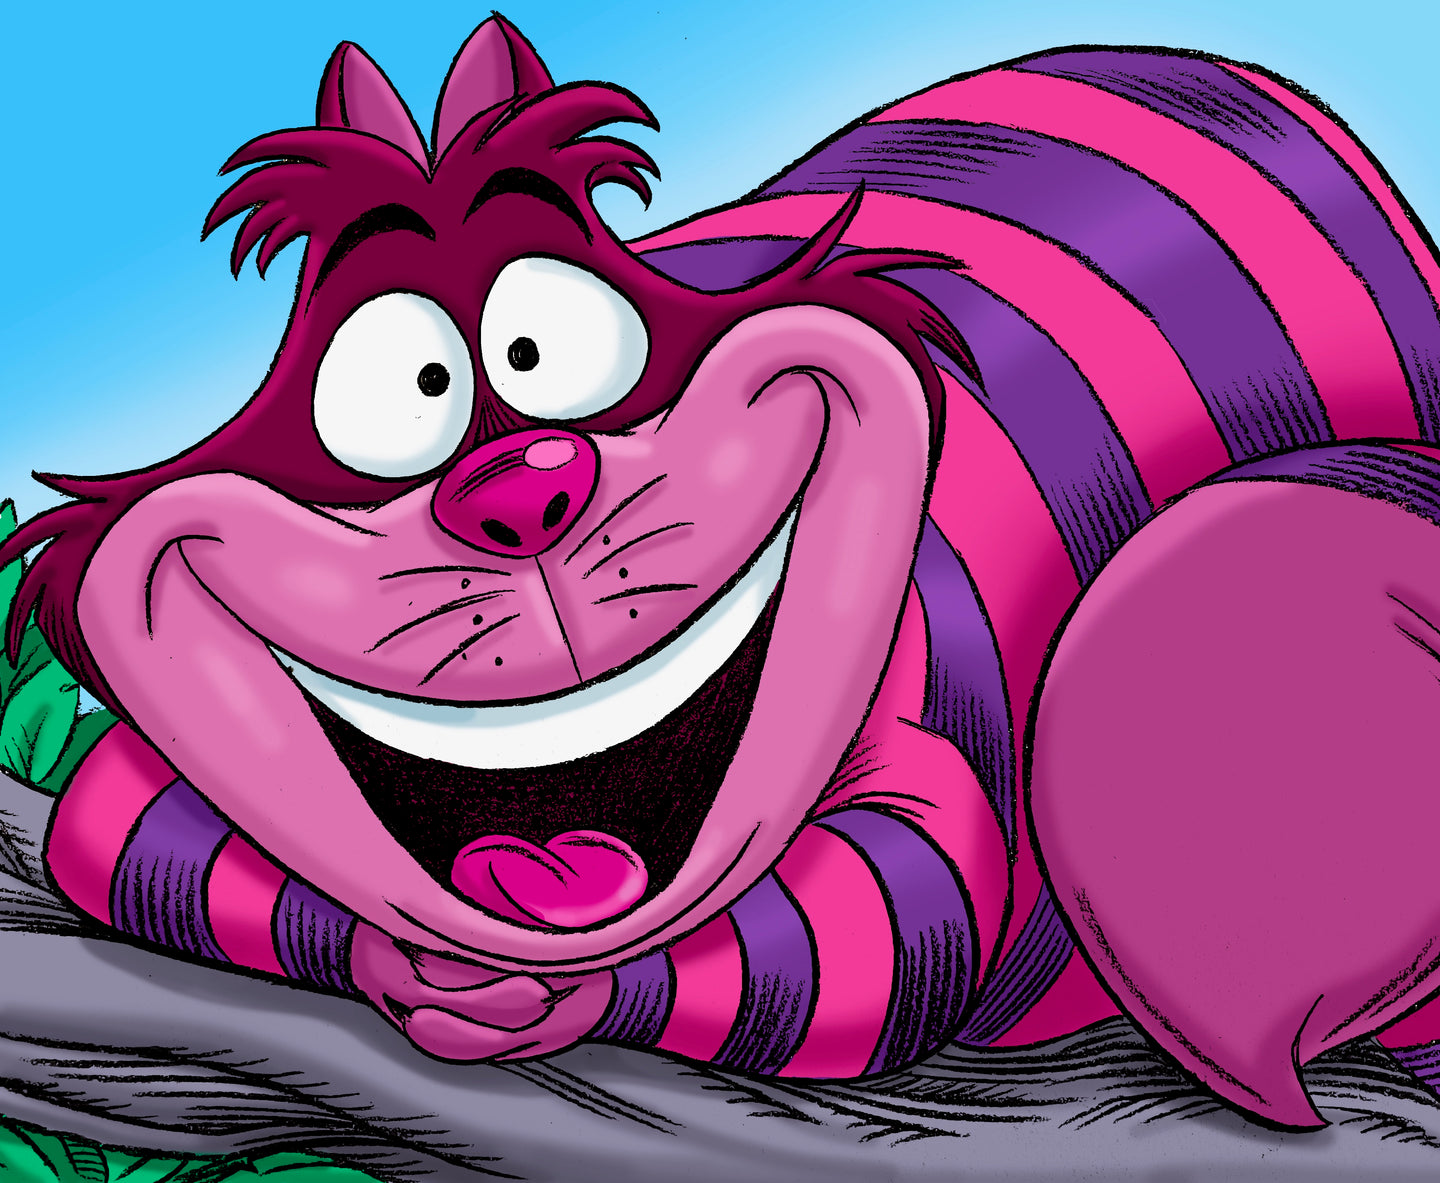 Alice in Wonderland Cheshire Cat Art Print - Created by Guy Gilchrist